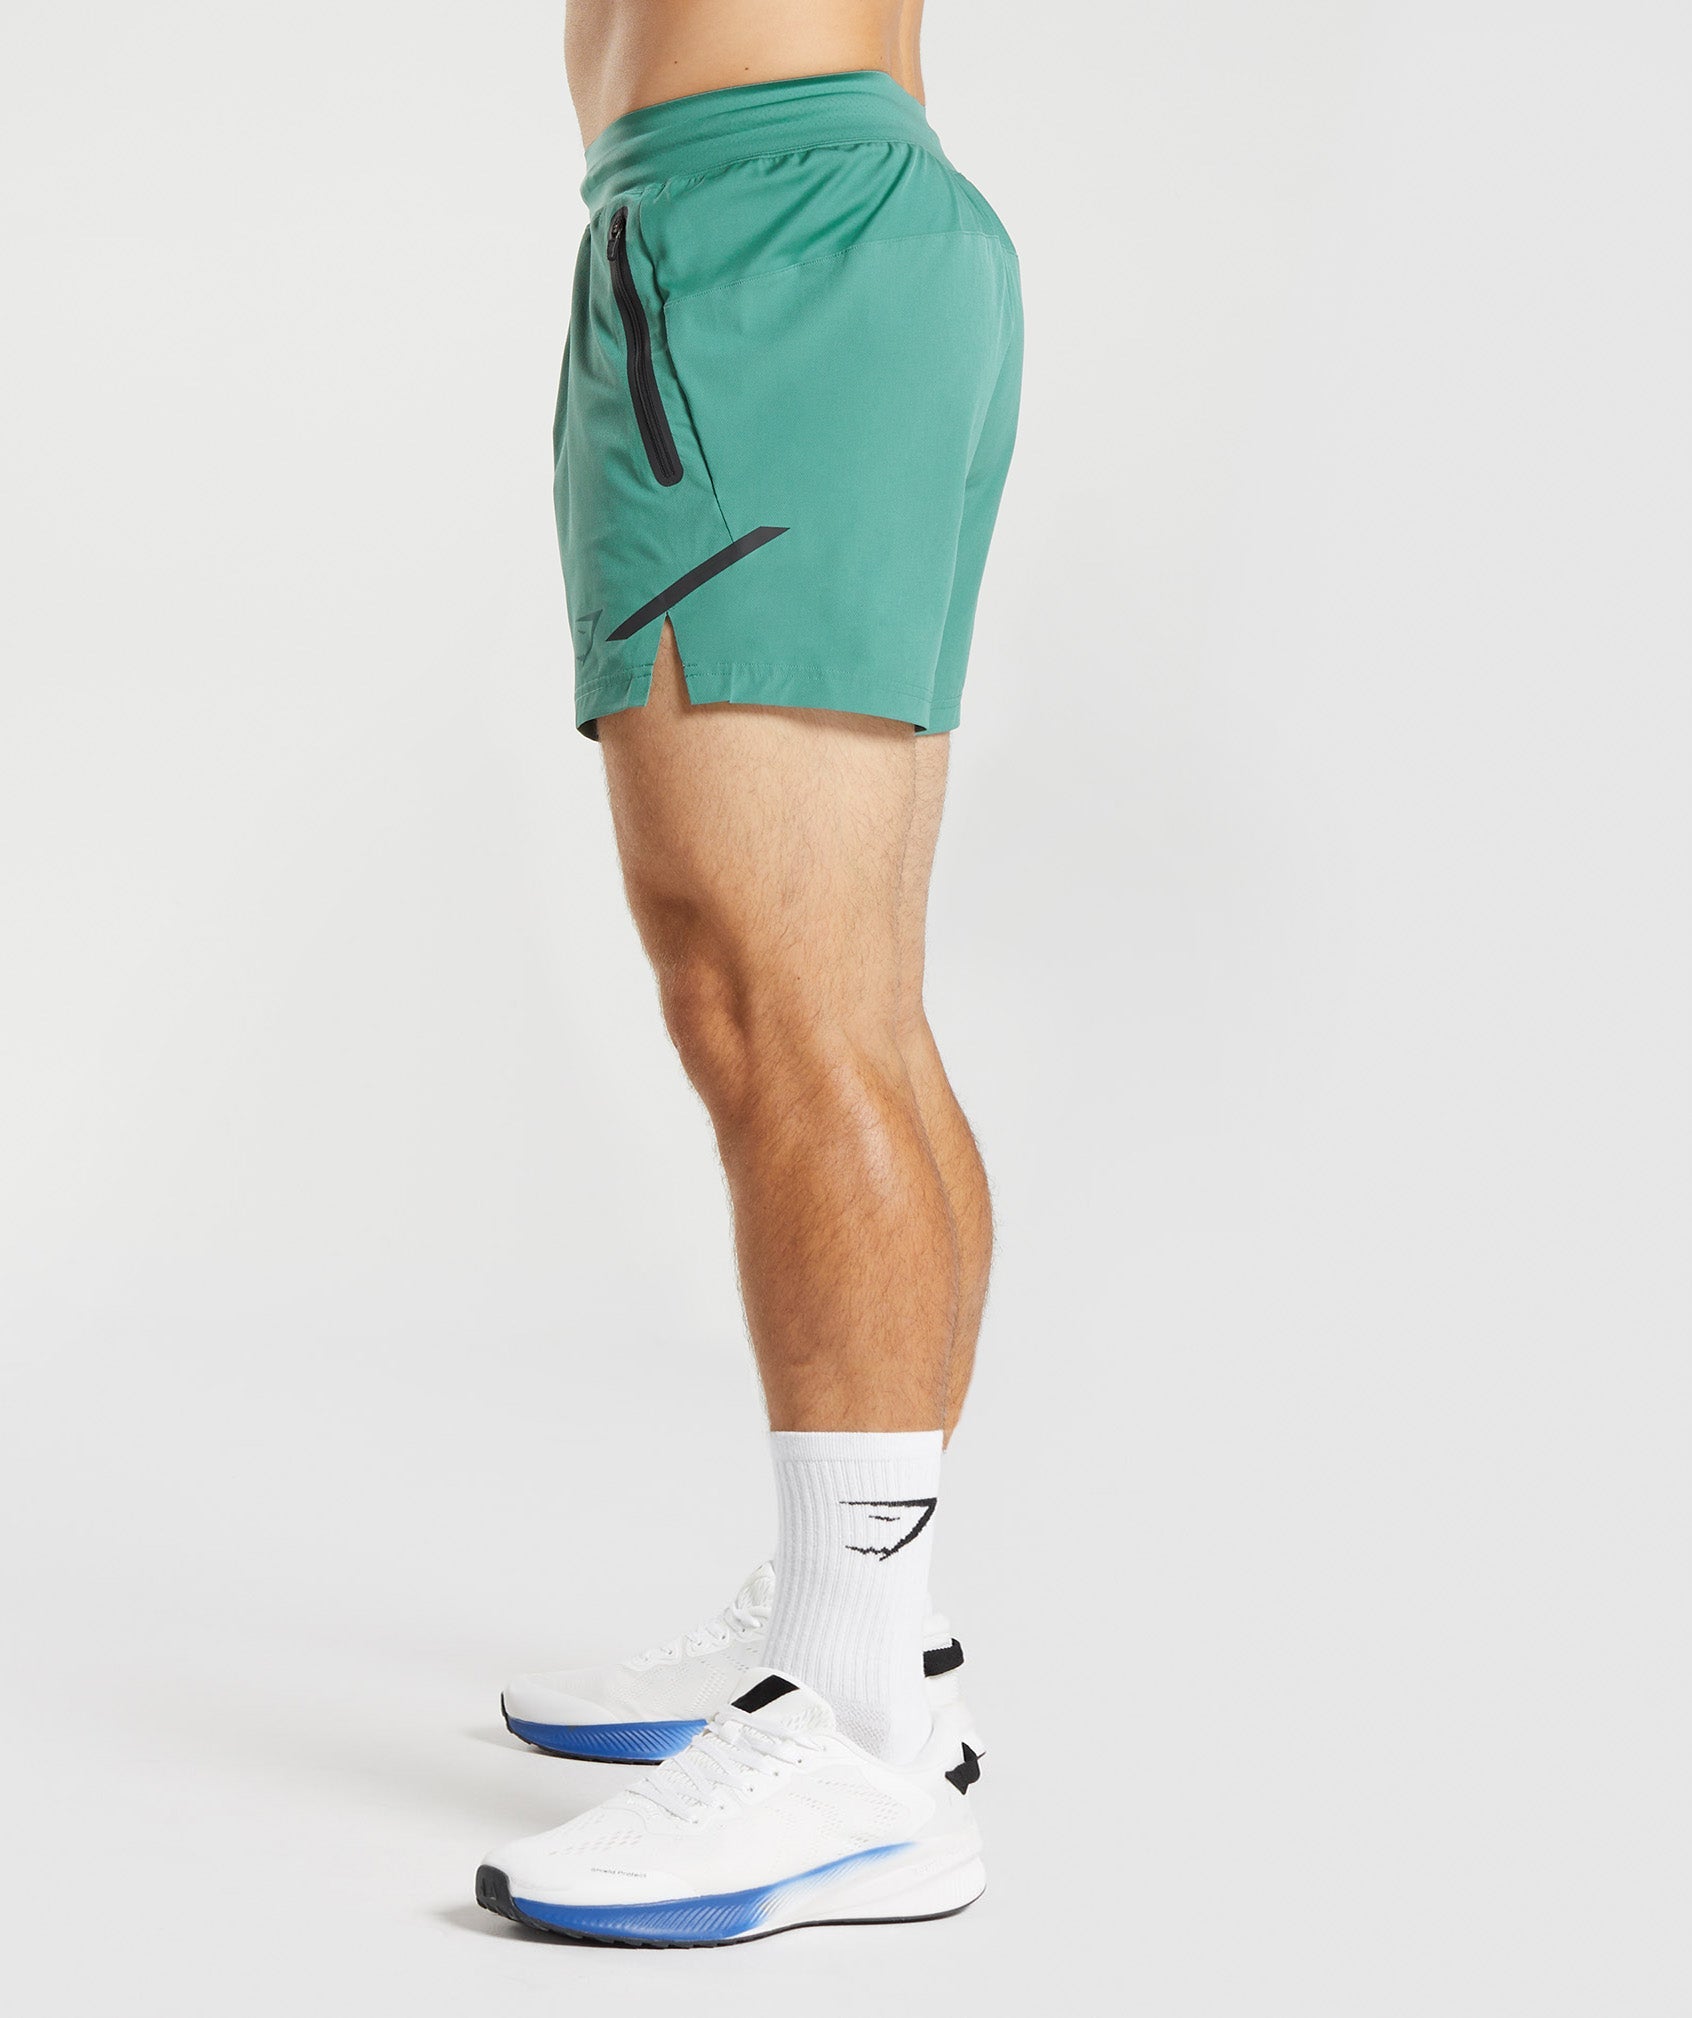 Apex 5" Perform Shorts in Hoya Green - view 3